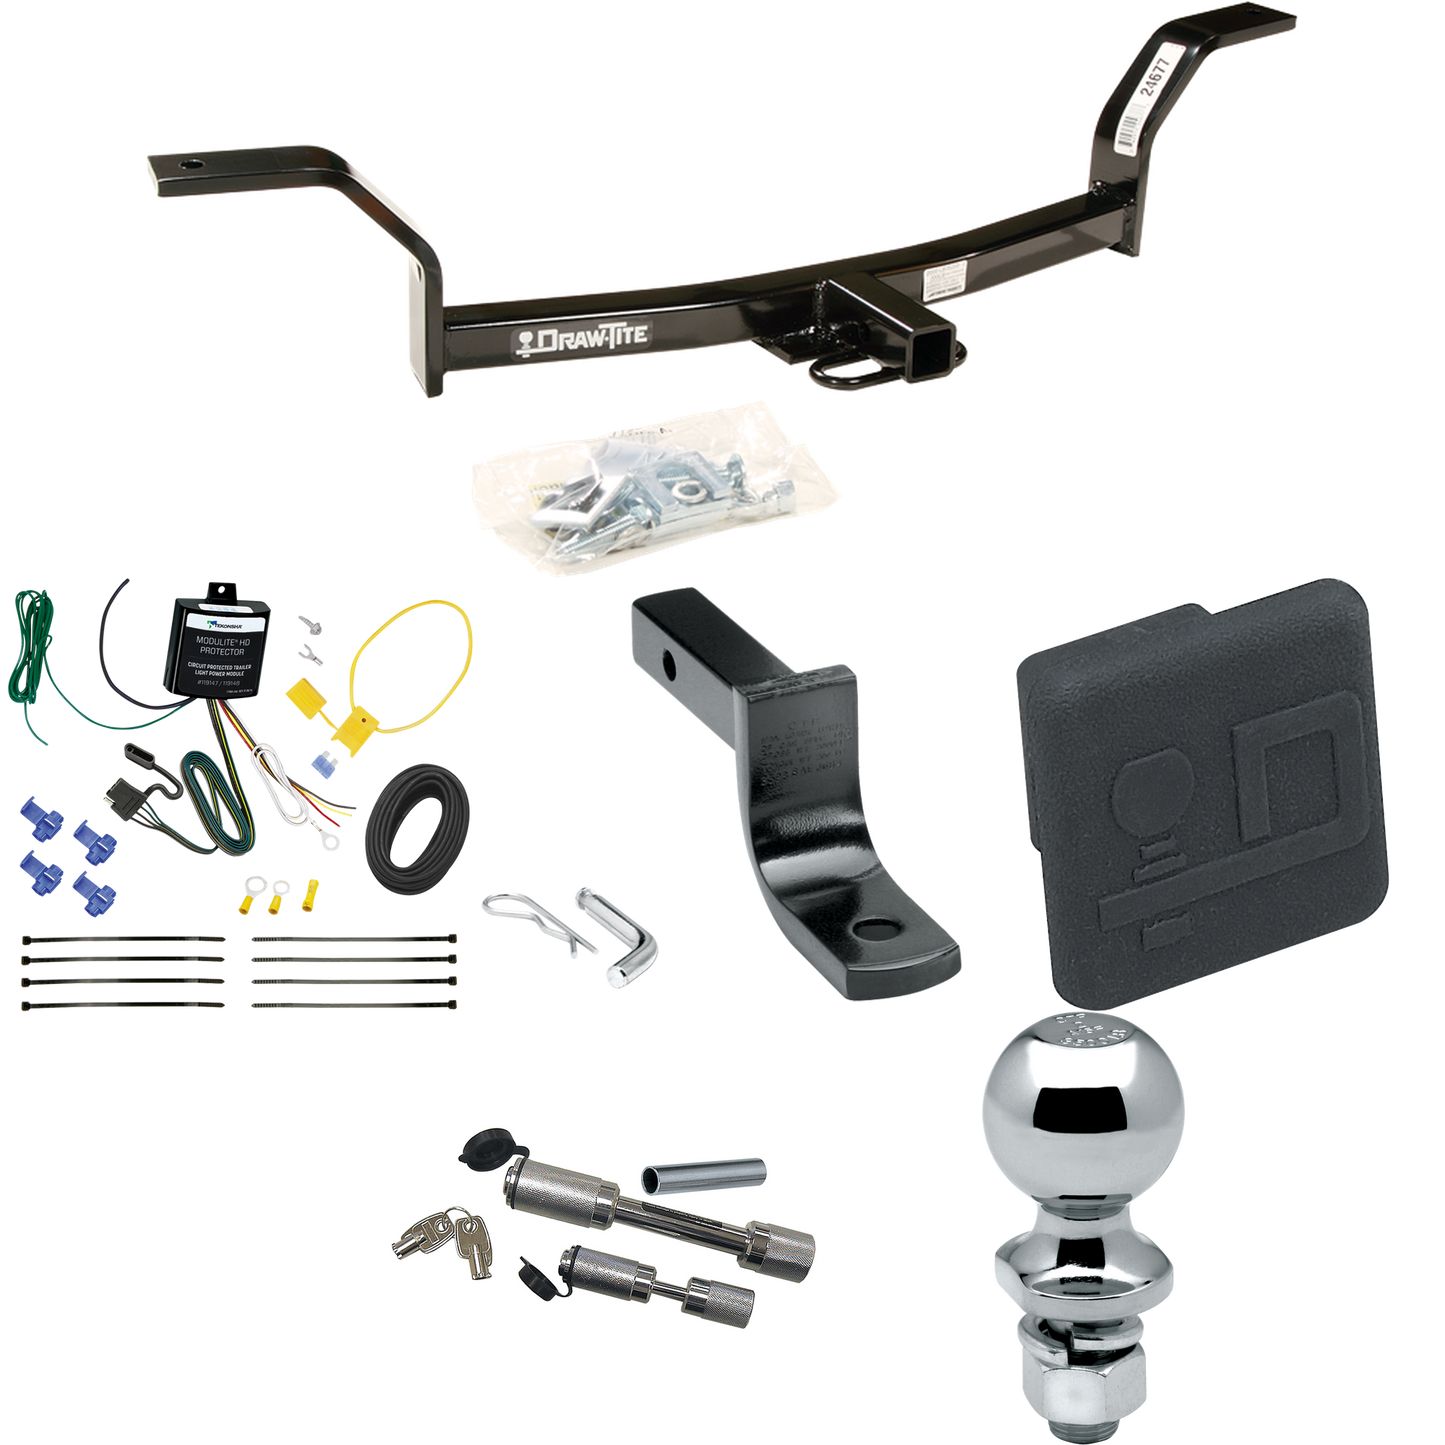 Fits 1992-2000 Honda Civic Trailer Hitch Tow PKG w/ 4-Flat Wiring Harness + Draw-Bar + 2" Ball + Hitch Cover + Dual Hitch & Coupler Locks By Draw-Tite